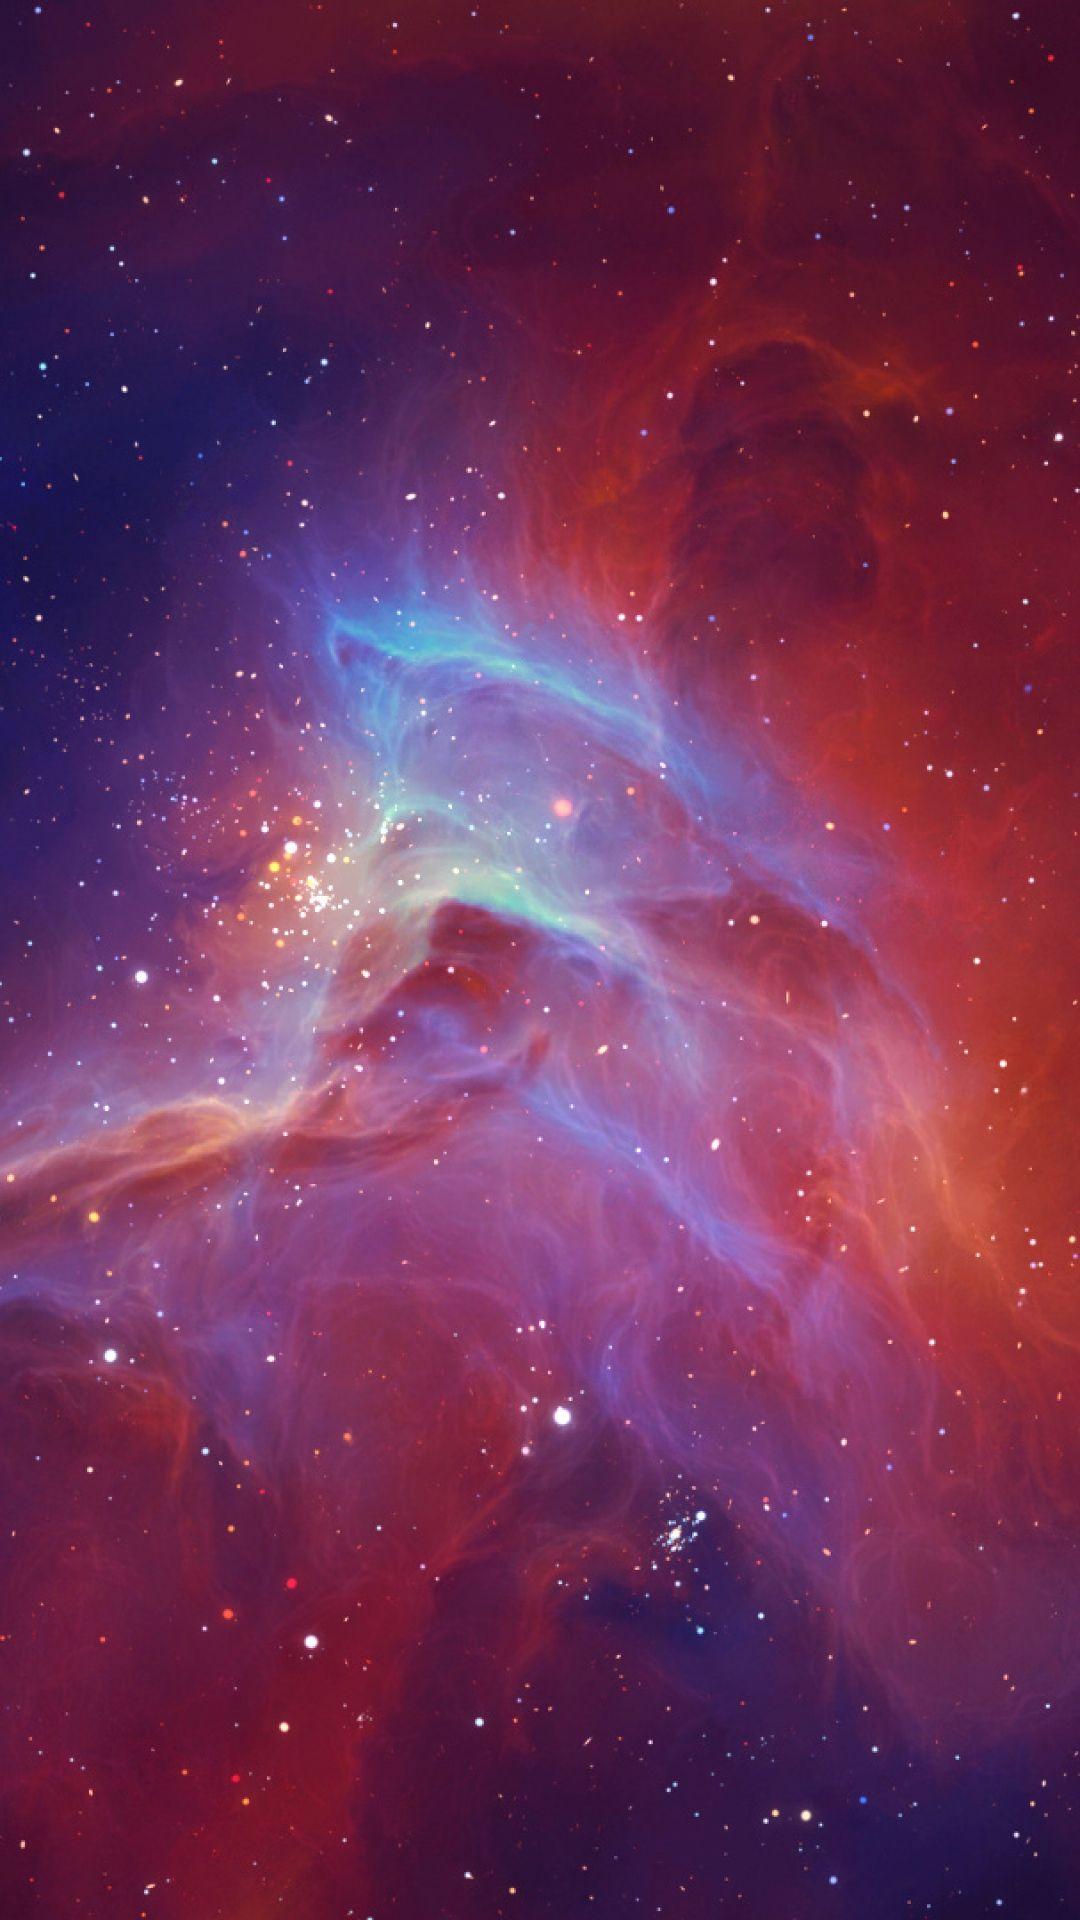 HD Cosmic wallpaper for your mobile devices